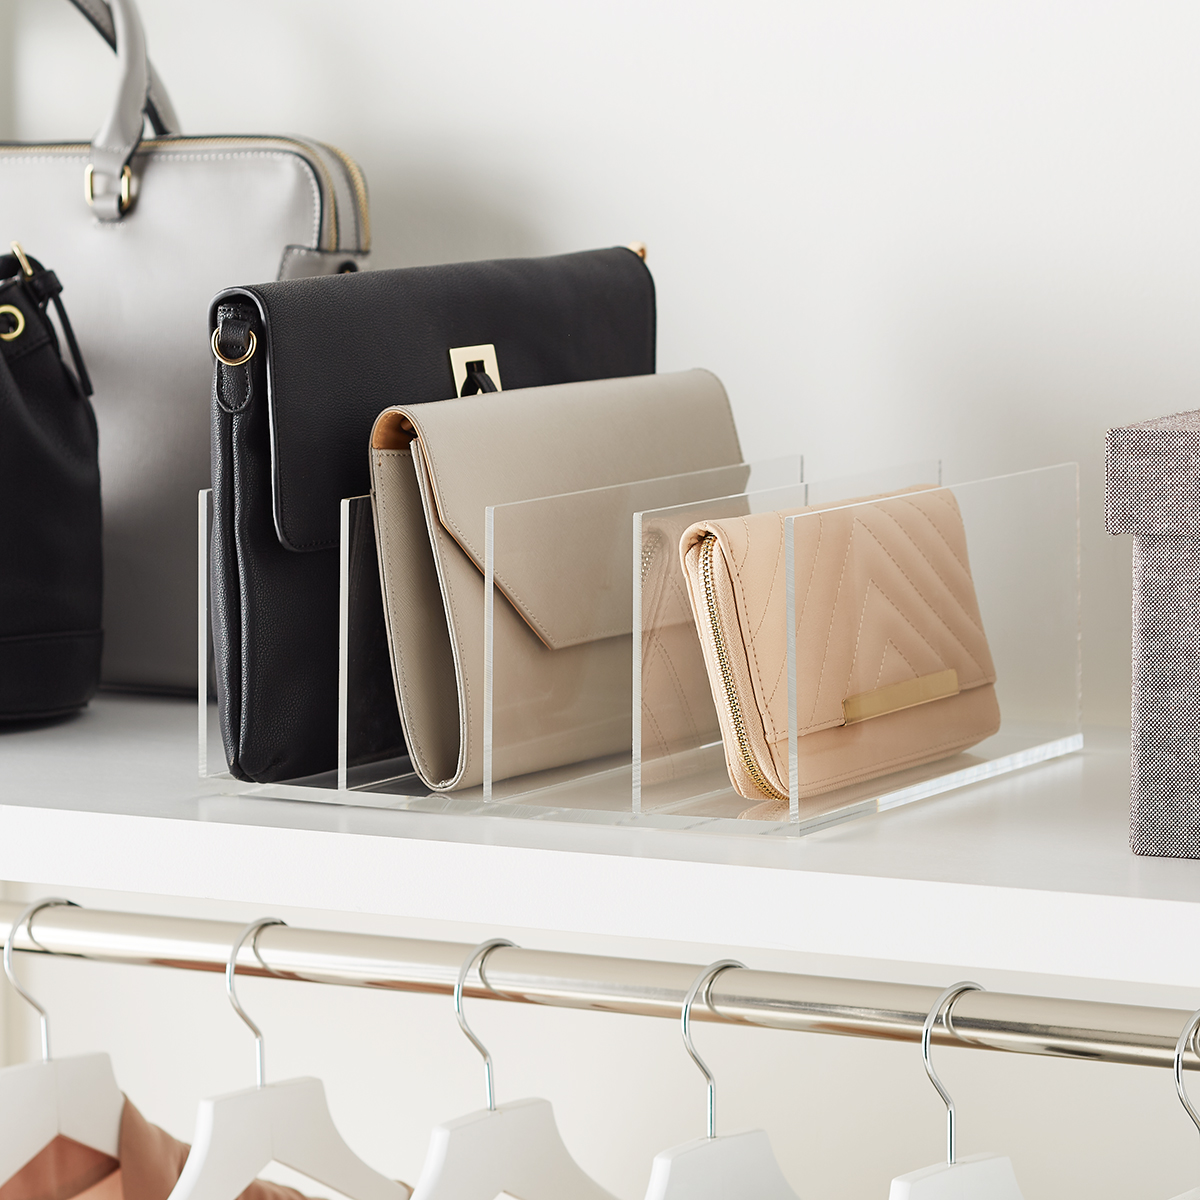 Do You Store Your Bags or Leave Them On Display? - PurseBlog